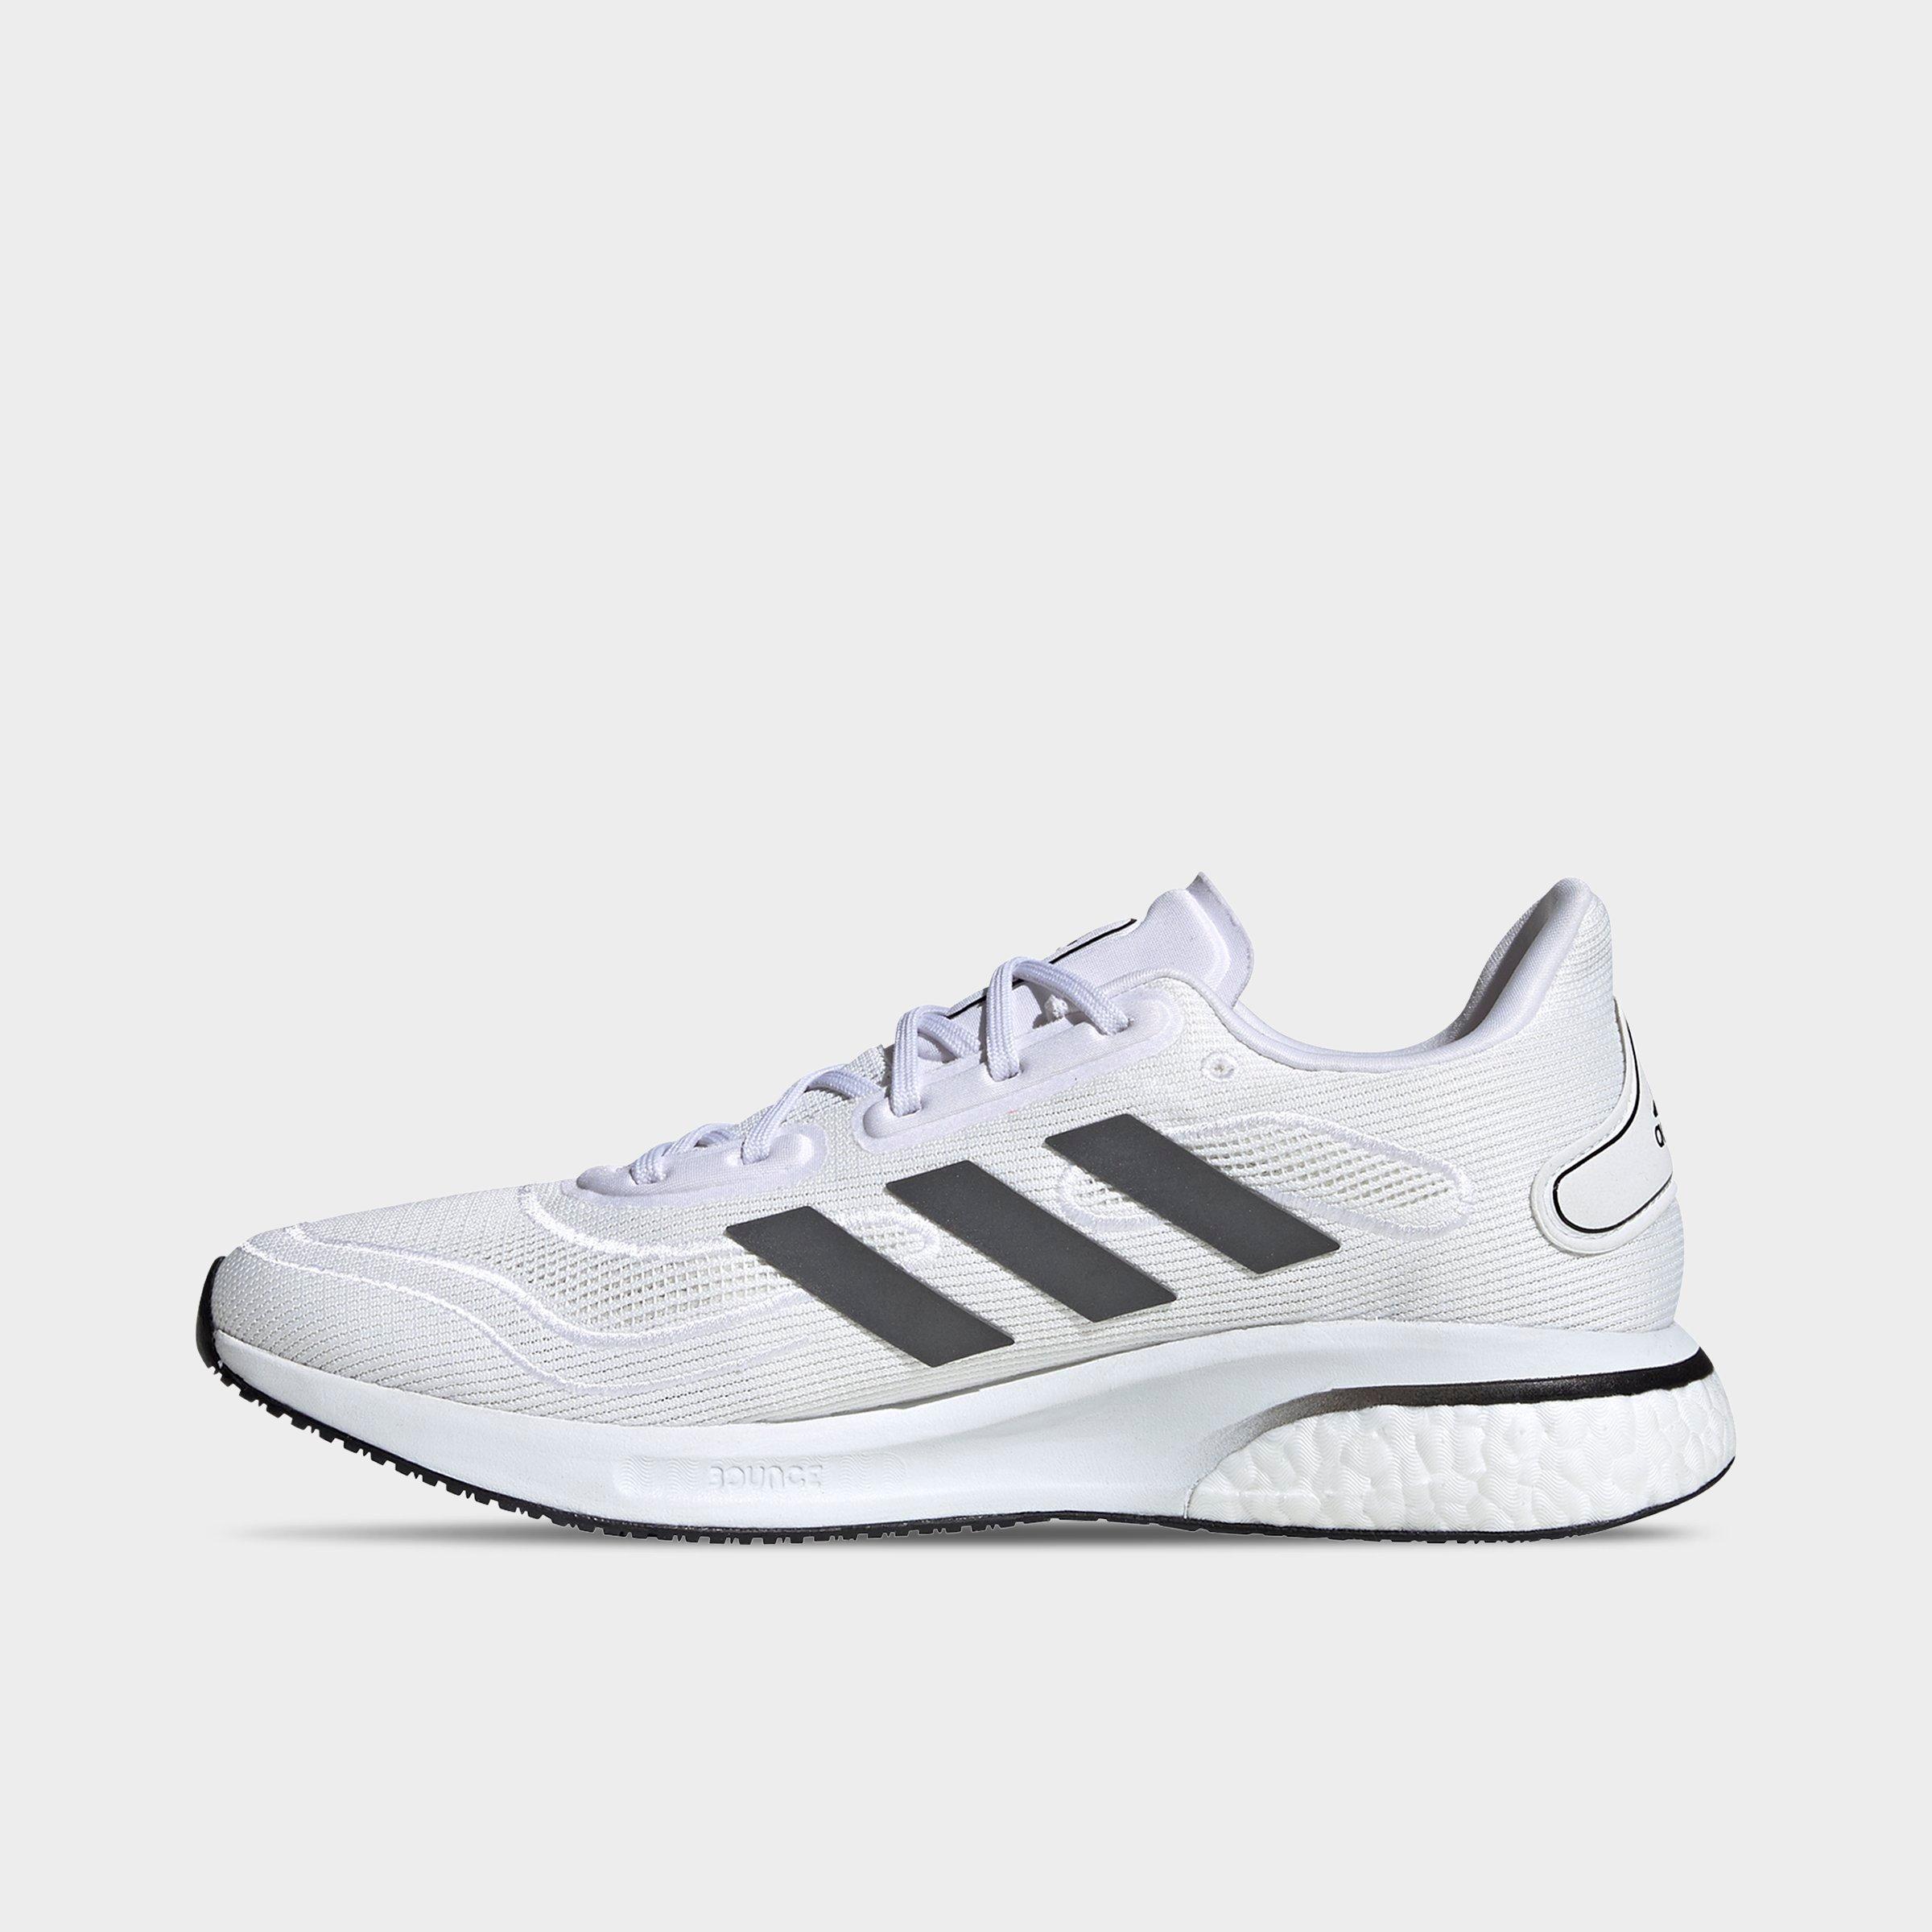 adidas low profile running shoes